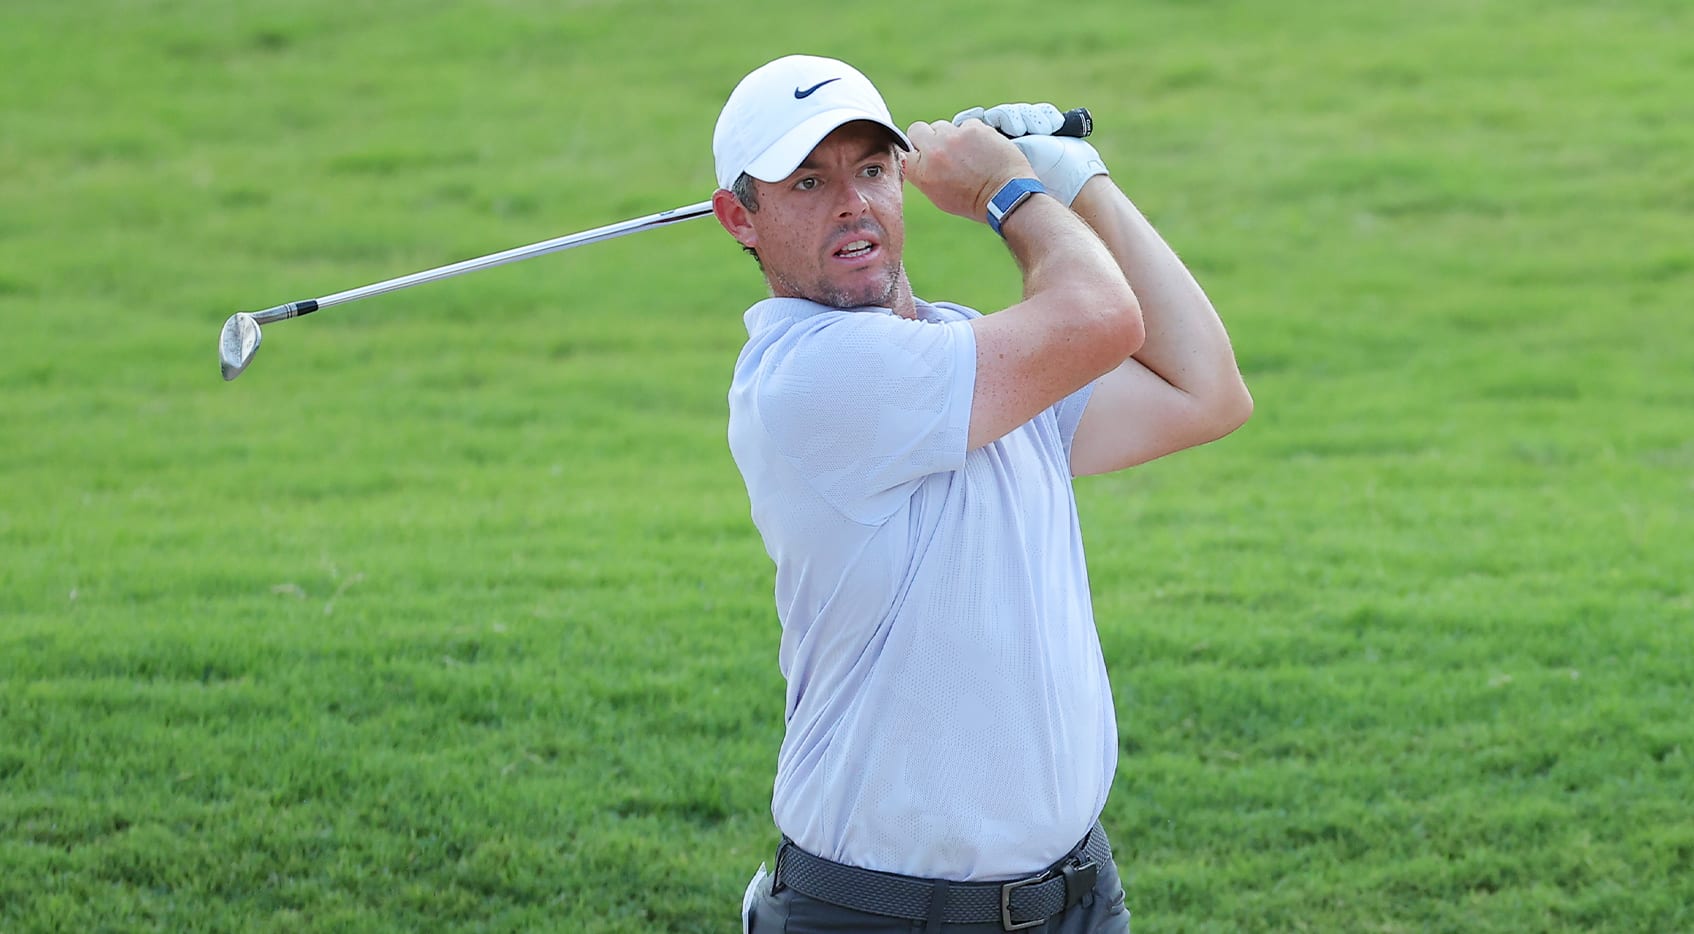 Rory McIlroy could return to world No. 1 at TOUR Championship - PGA TOUR